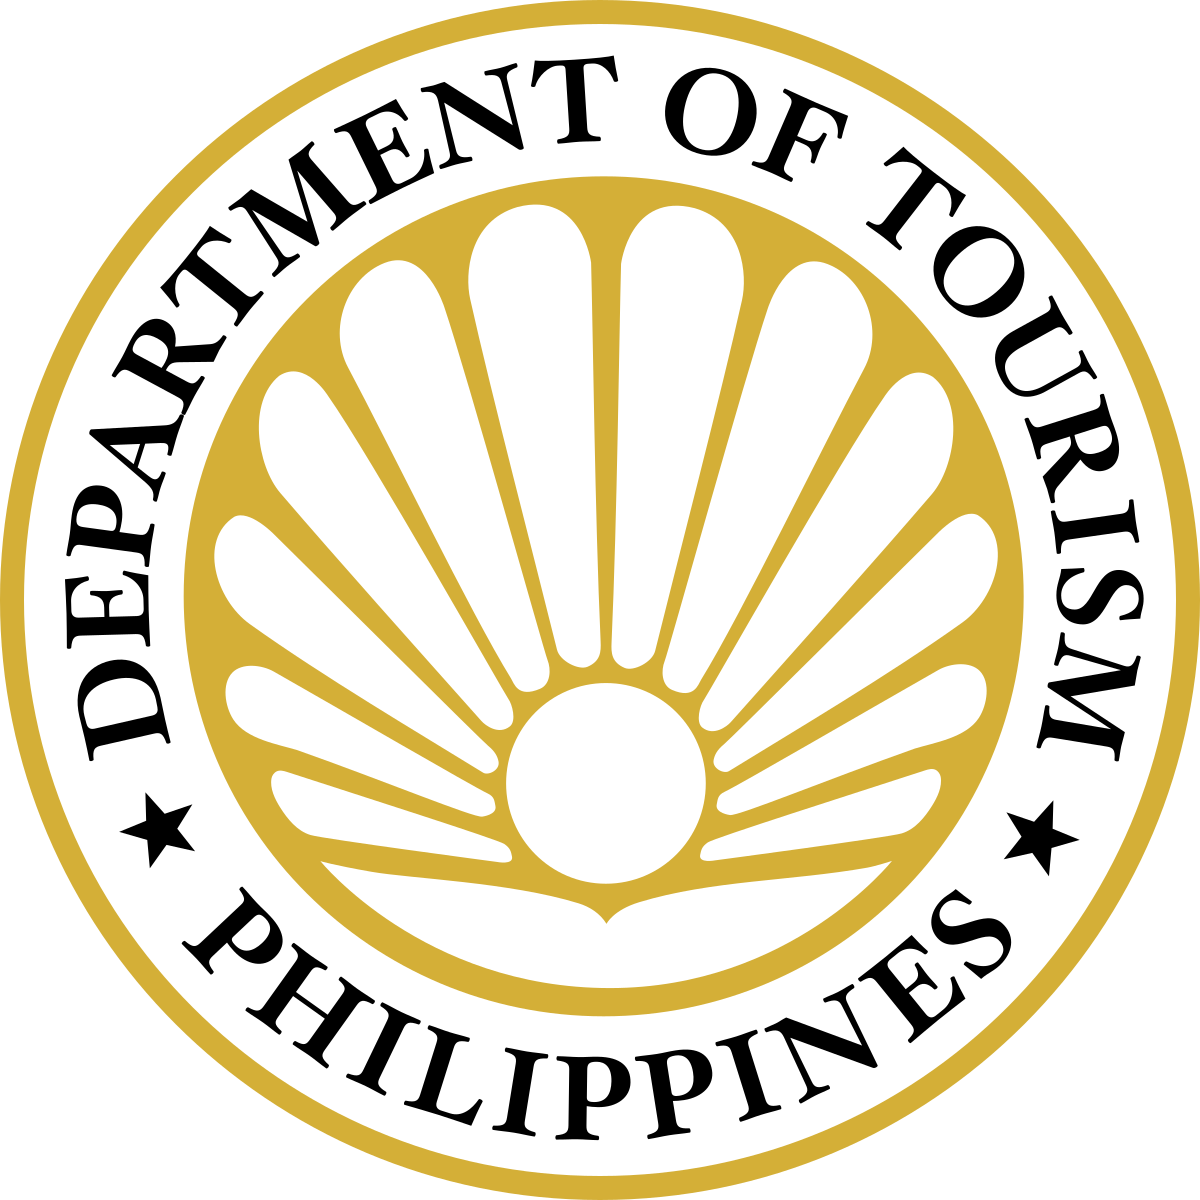 Philippine Government Department Of Tourism Philippines Hdpng.com  - Kulturang Pinoy, Transparent background PNG HD thumbnail